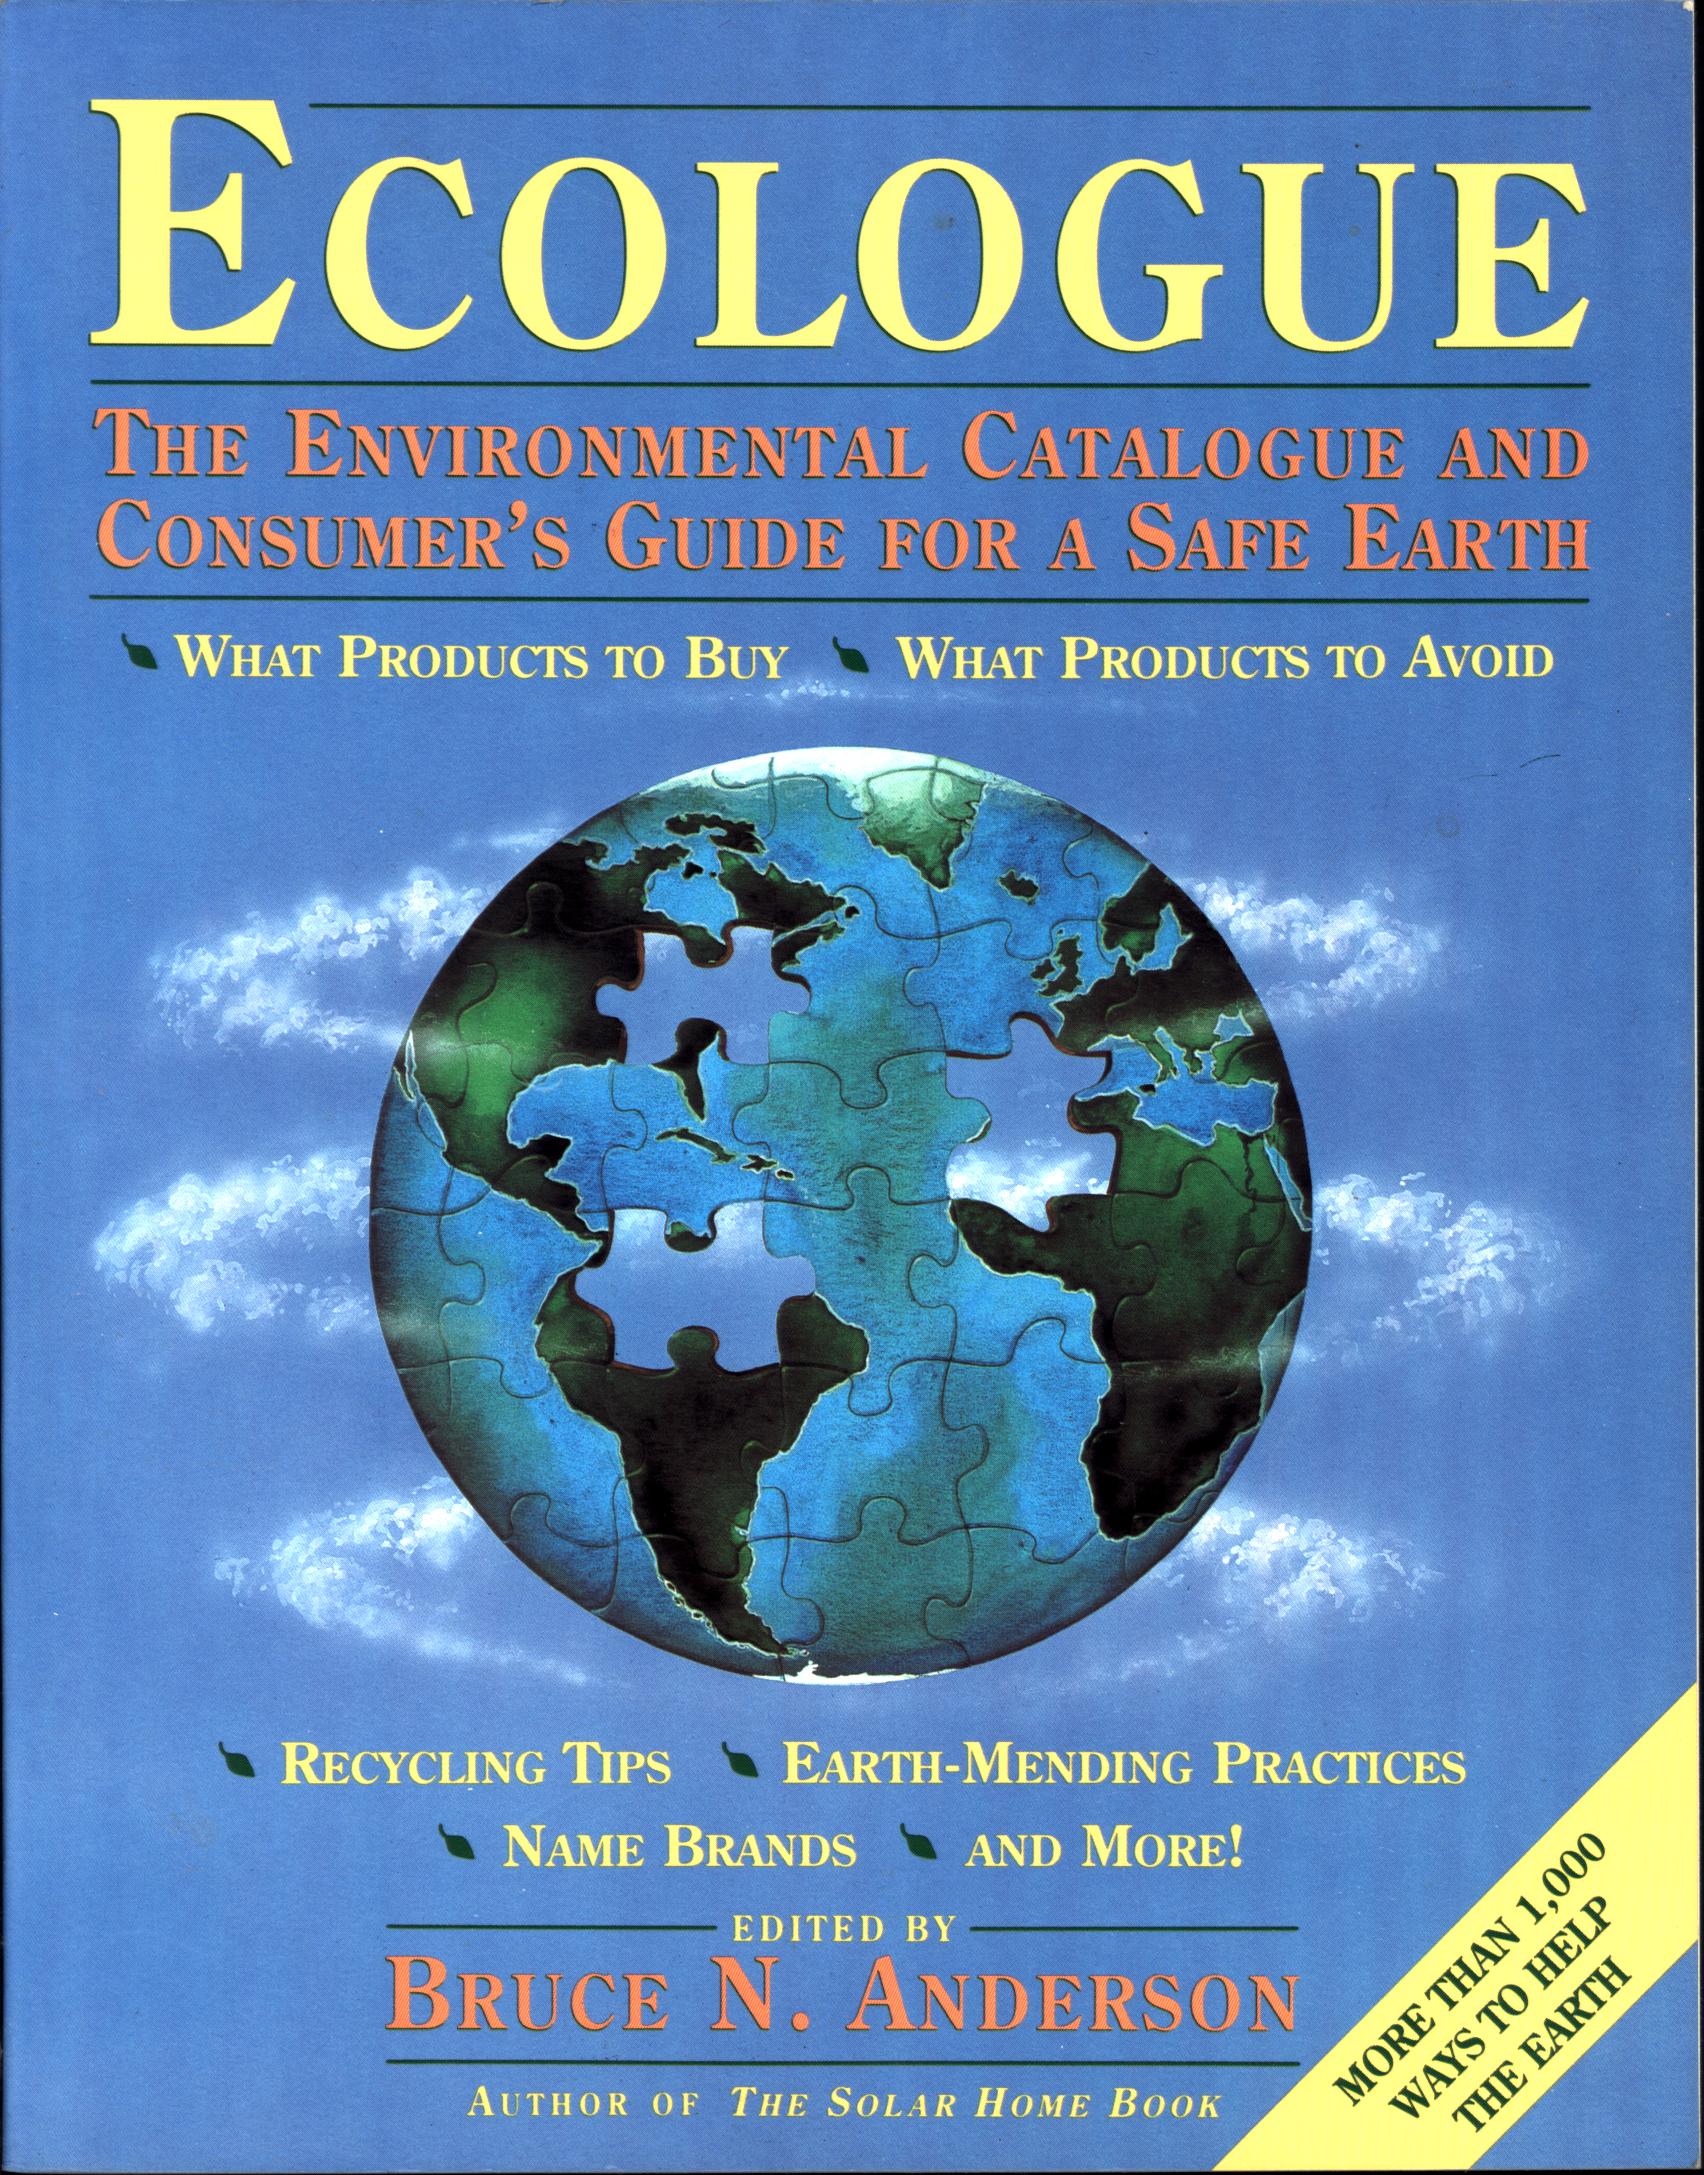 ECOLOGUE: the environmental catalogue and consumer's guide for a safe Earth. prha5282a